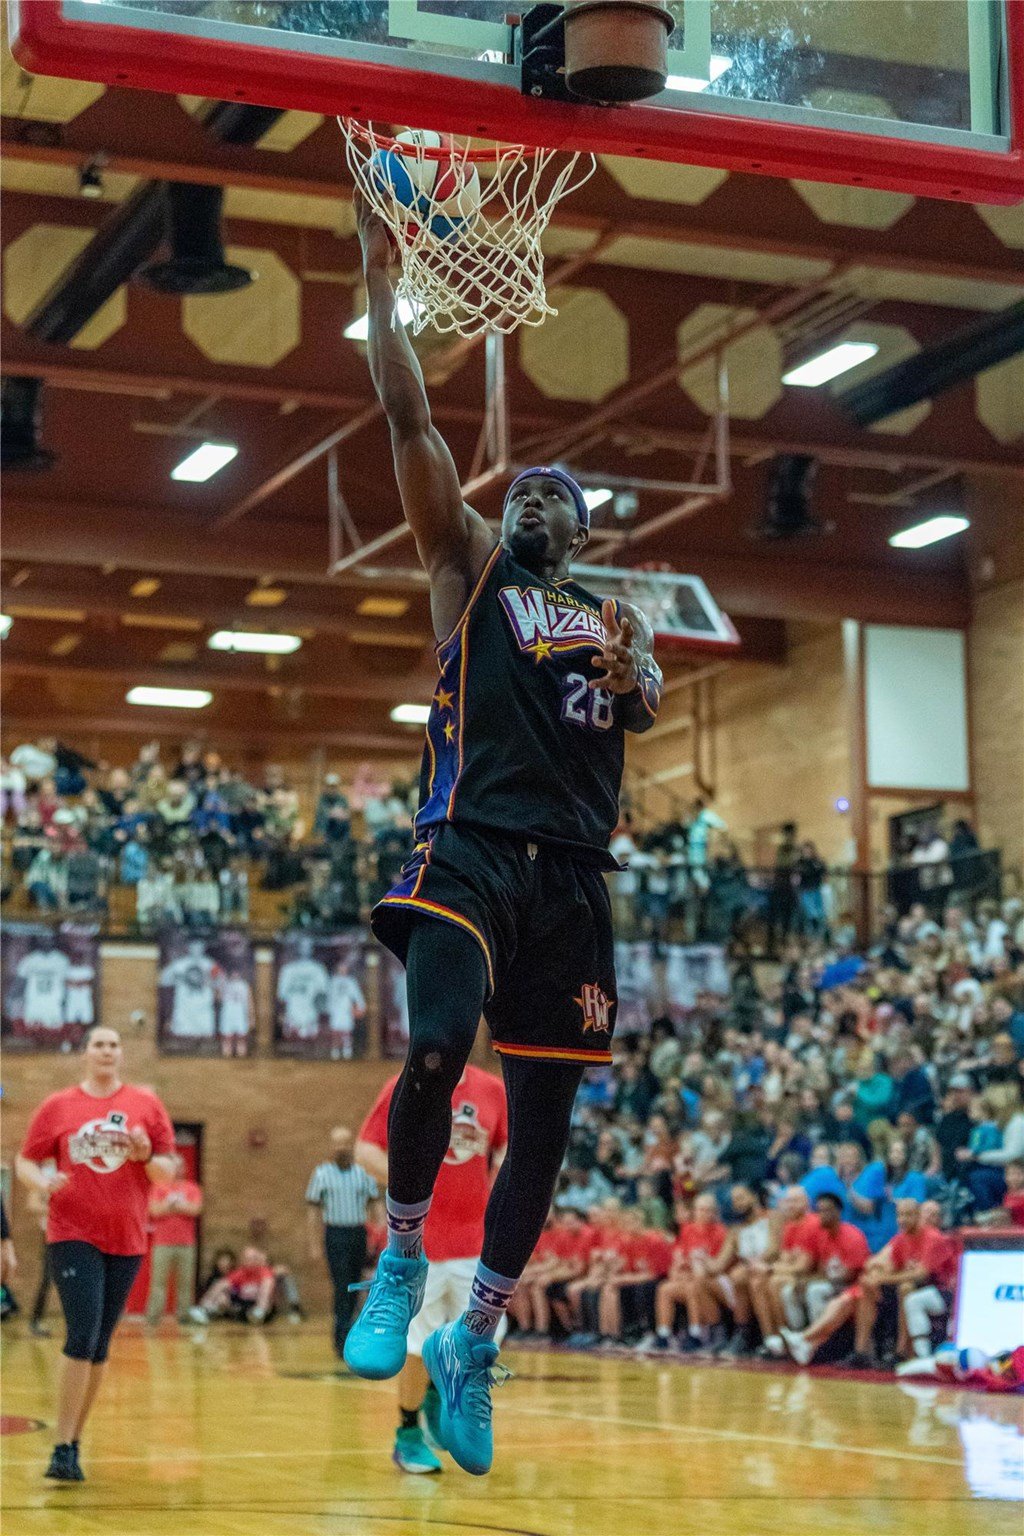 A Harlem Wizards player makes a slam dunk.